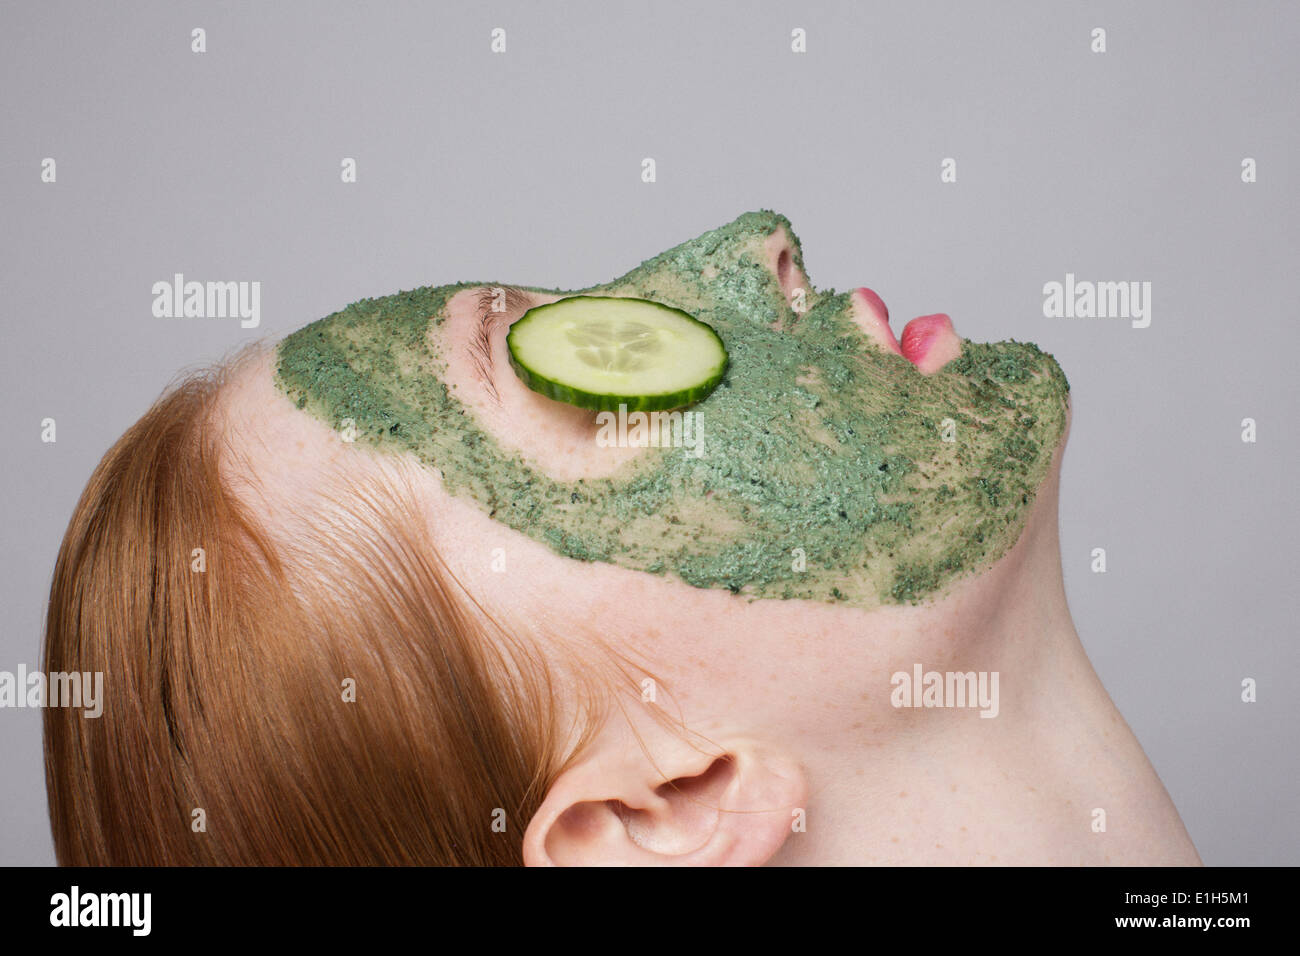 Young woman wearing face mask and cucumber over eyes Stock Photo